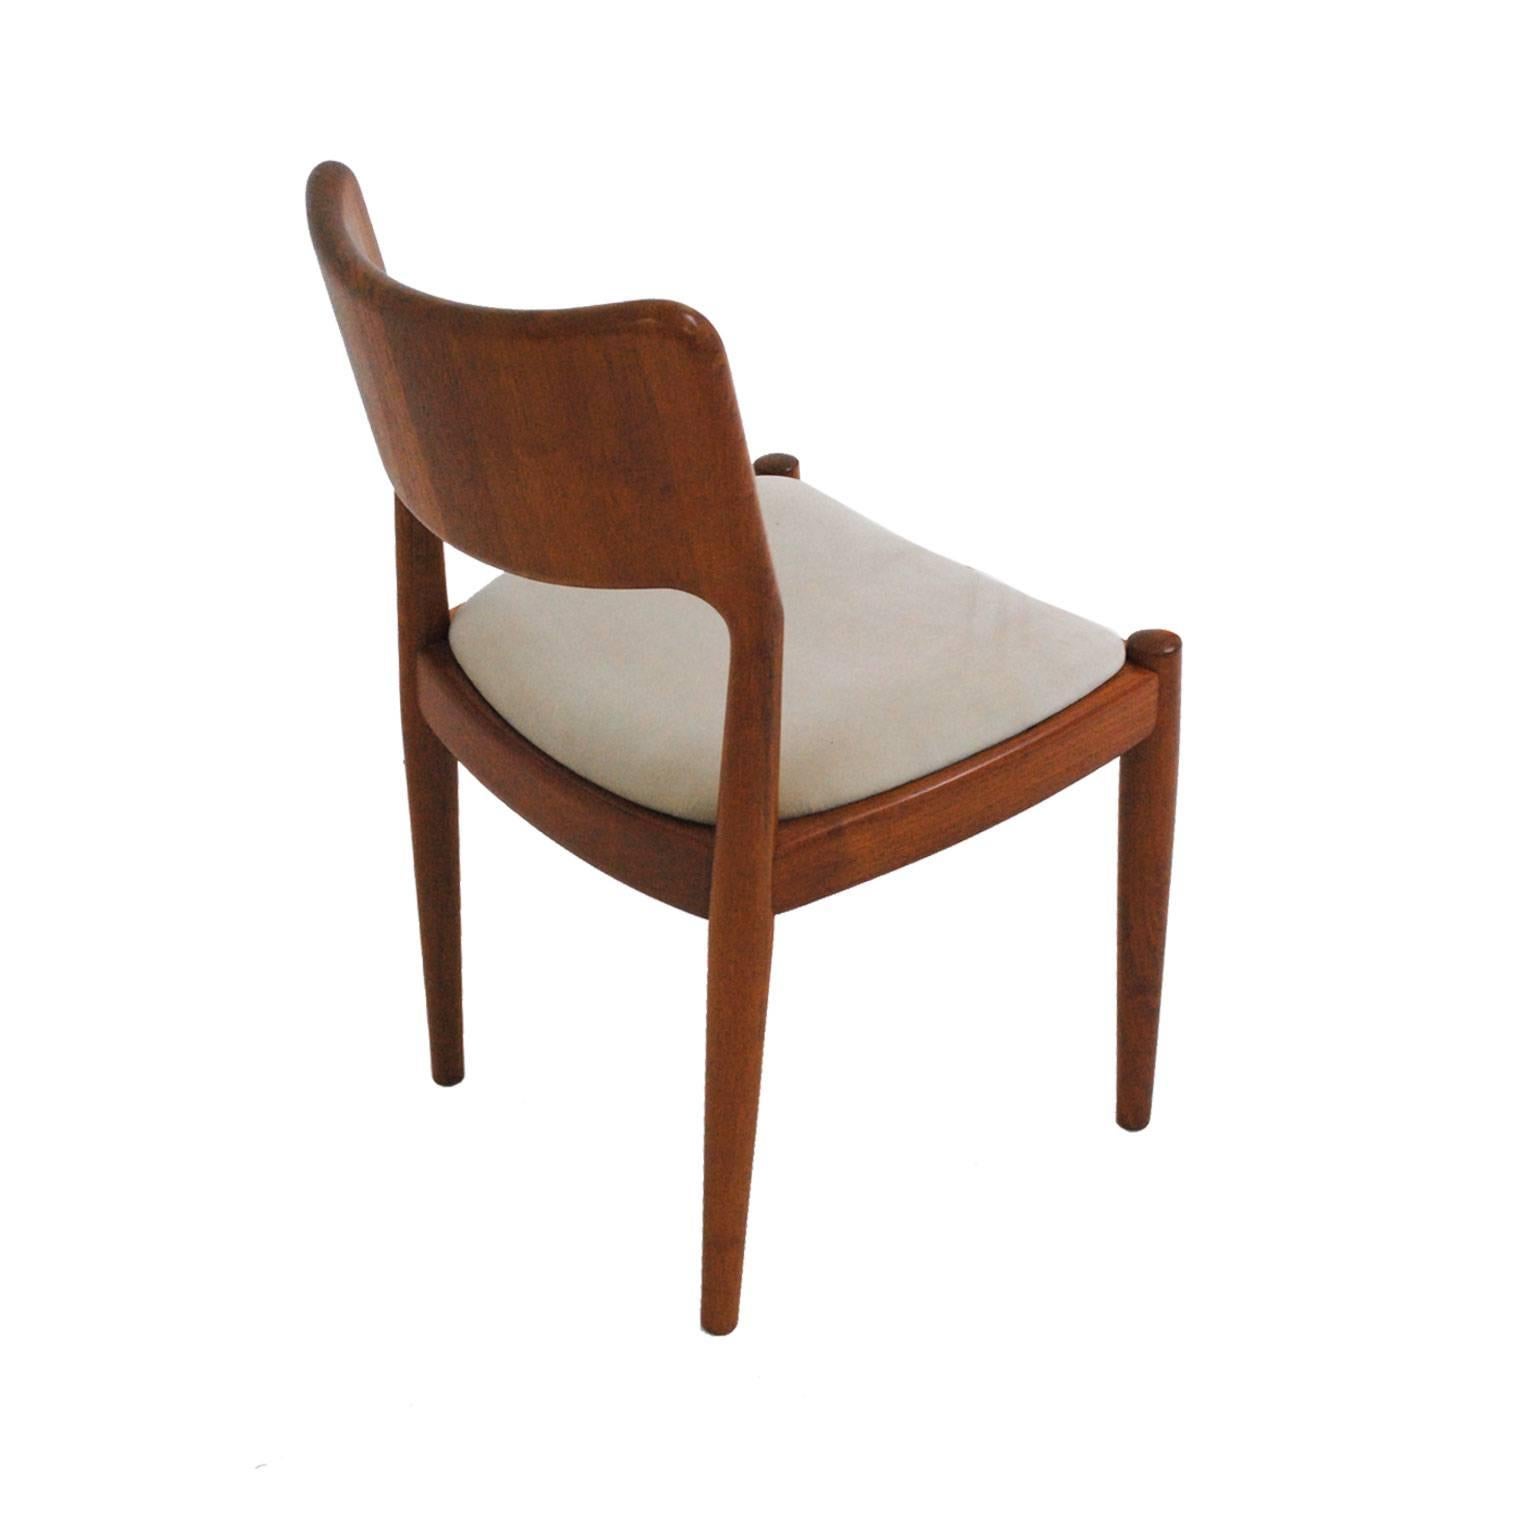 Mid-20th Century Set of Four Chairs Designed by Niels Møller for J.L. Moller